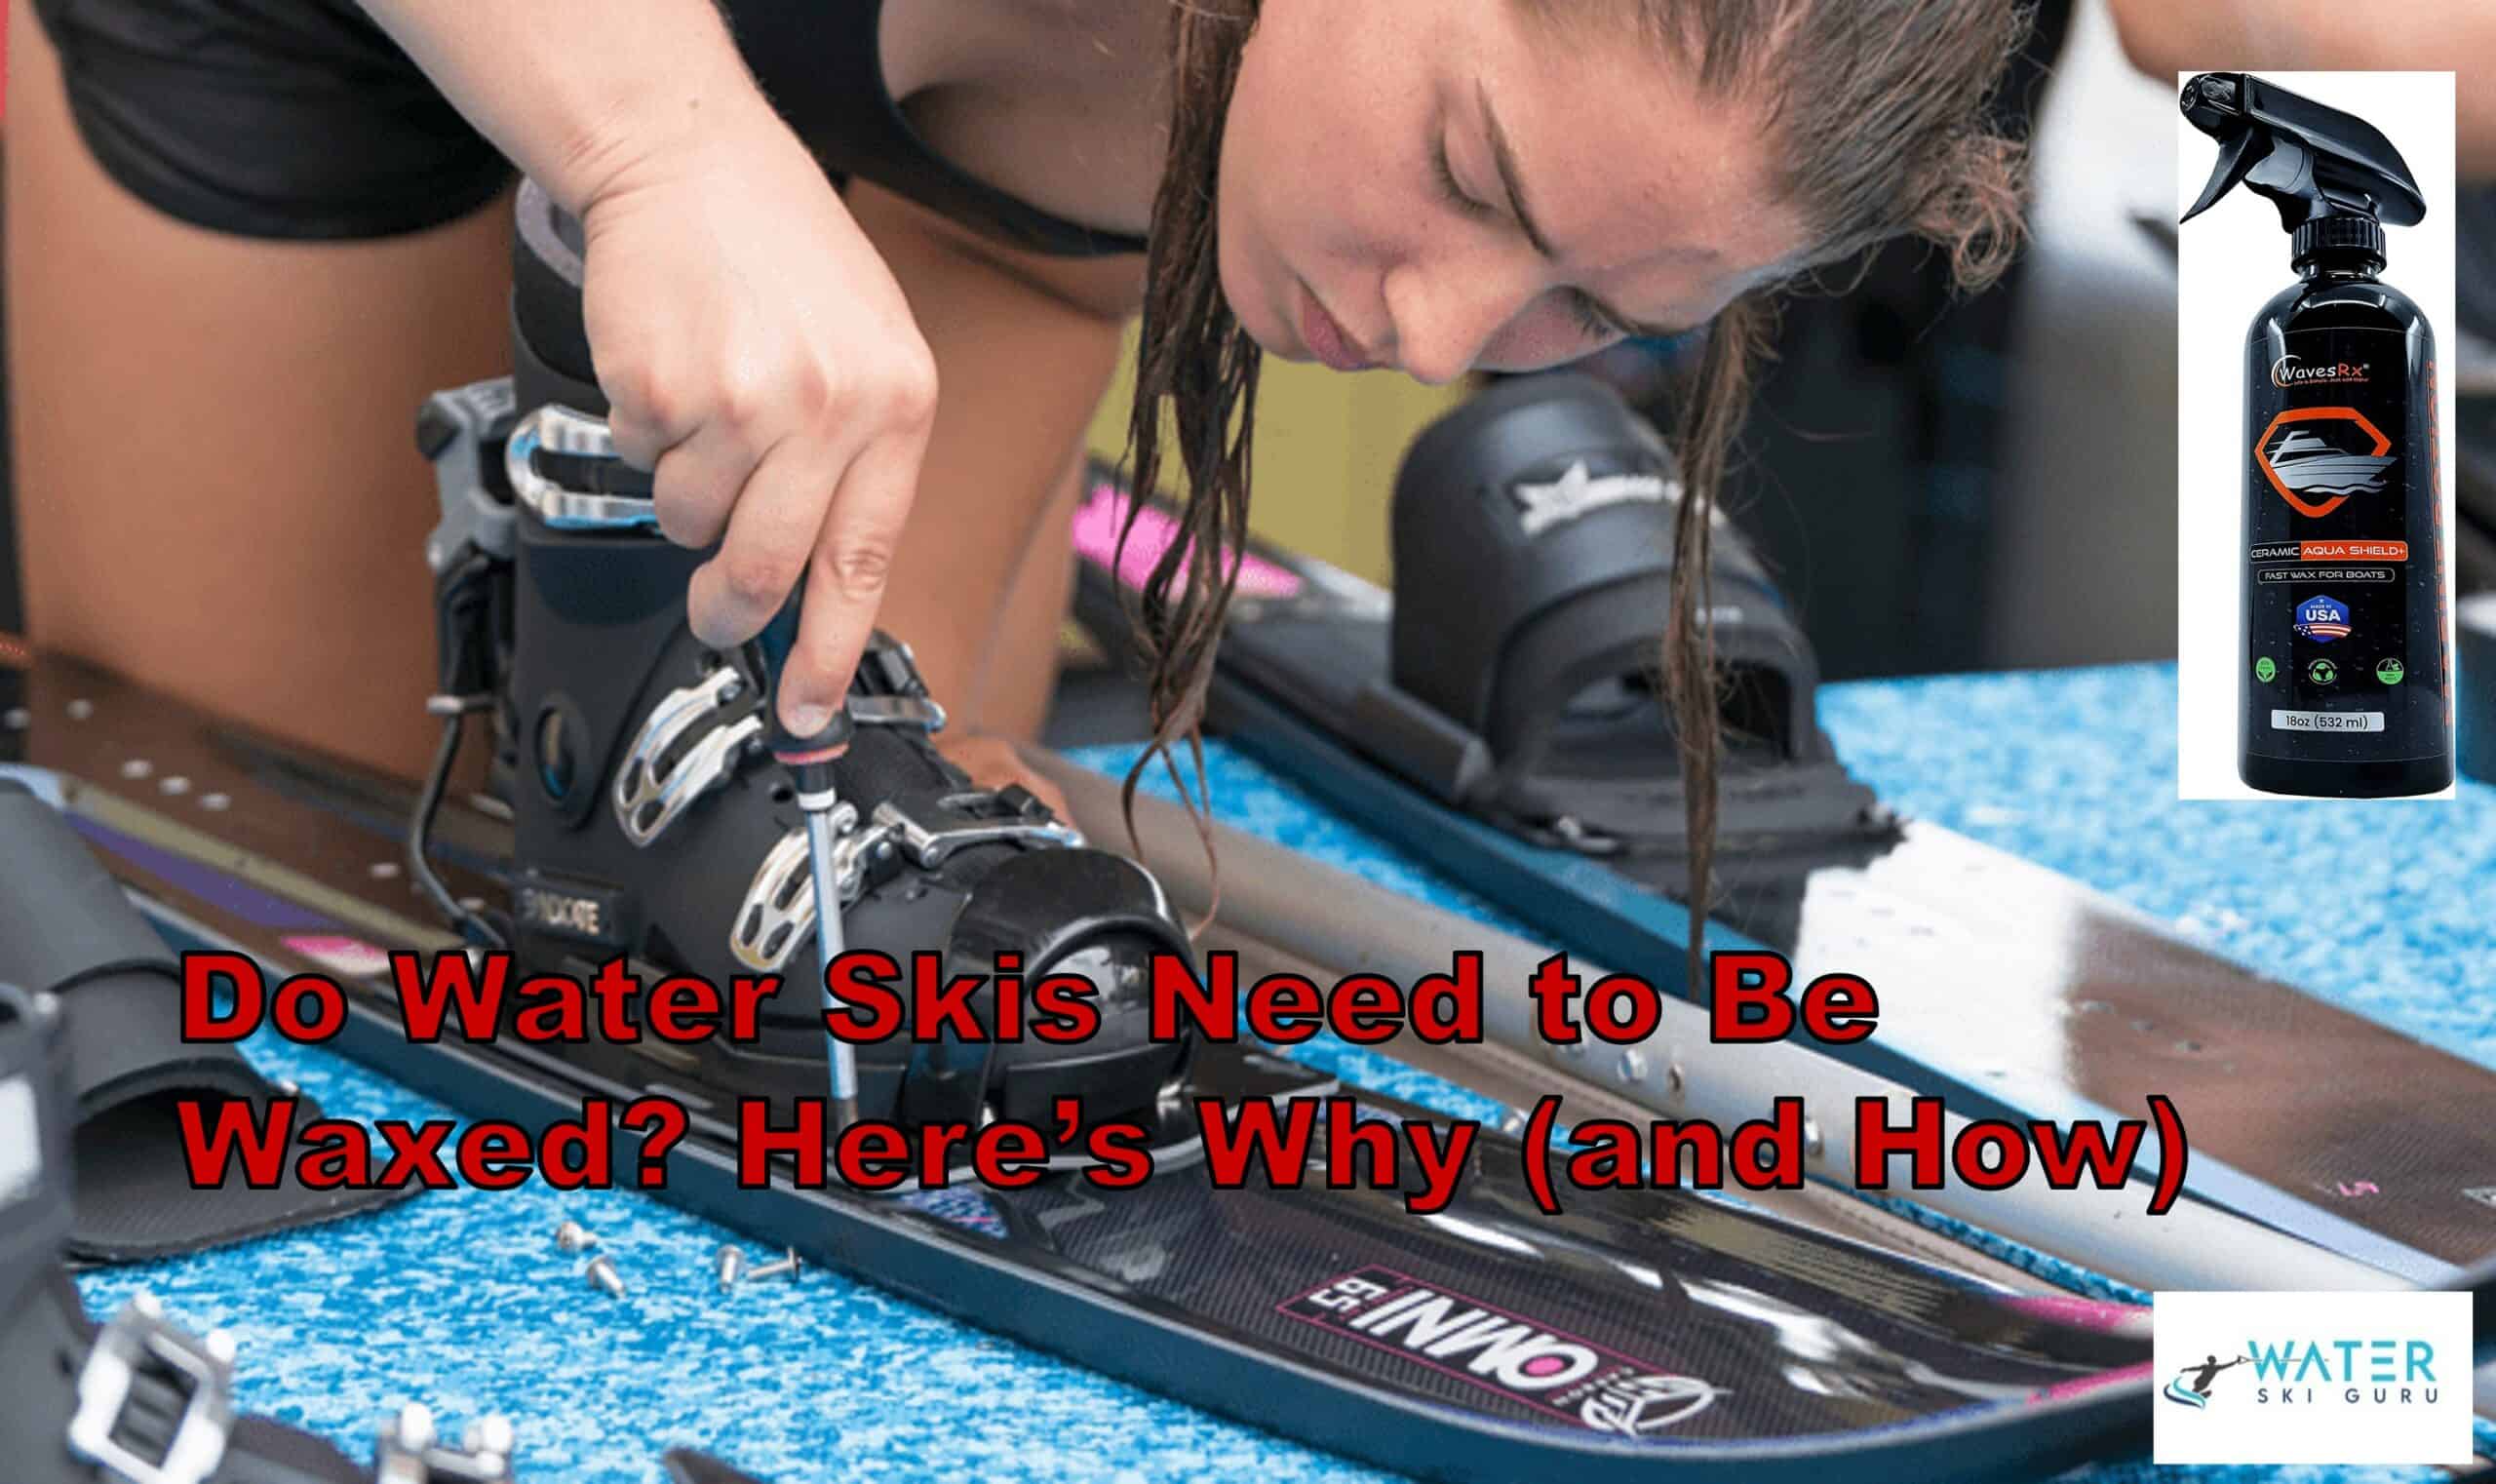 Do Water Skis Need to Be Waxed Here's Why and How